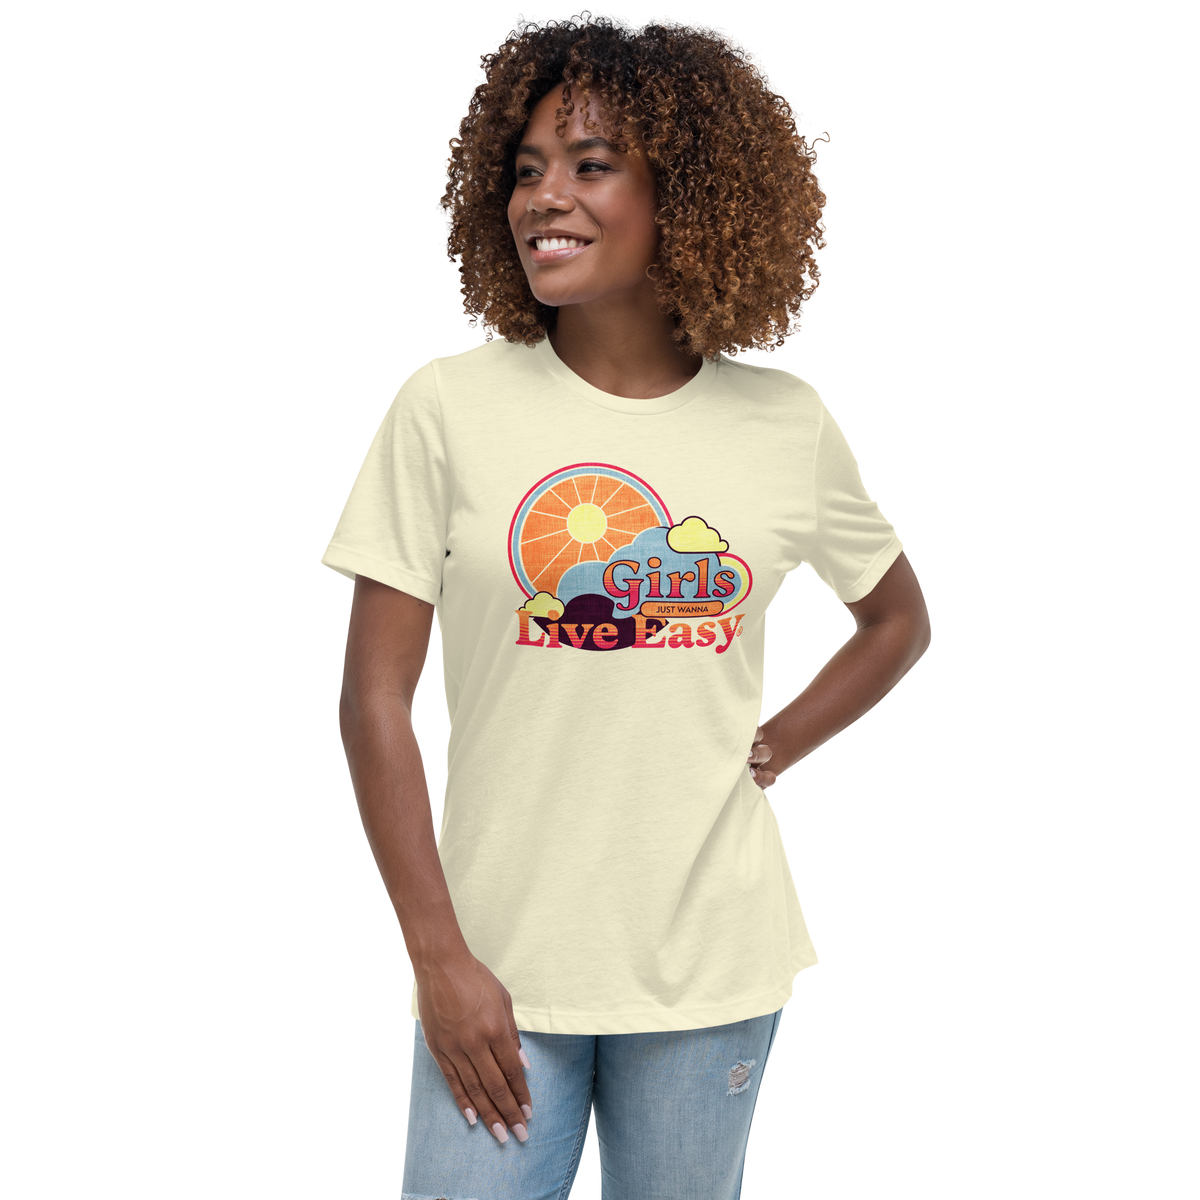 Girls Just Wanna Live Easy Women's Relaxed Tee - Living Easy®